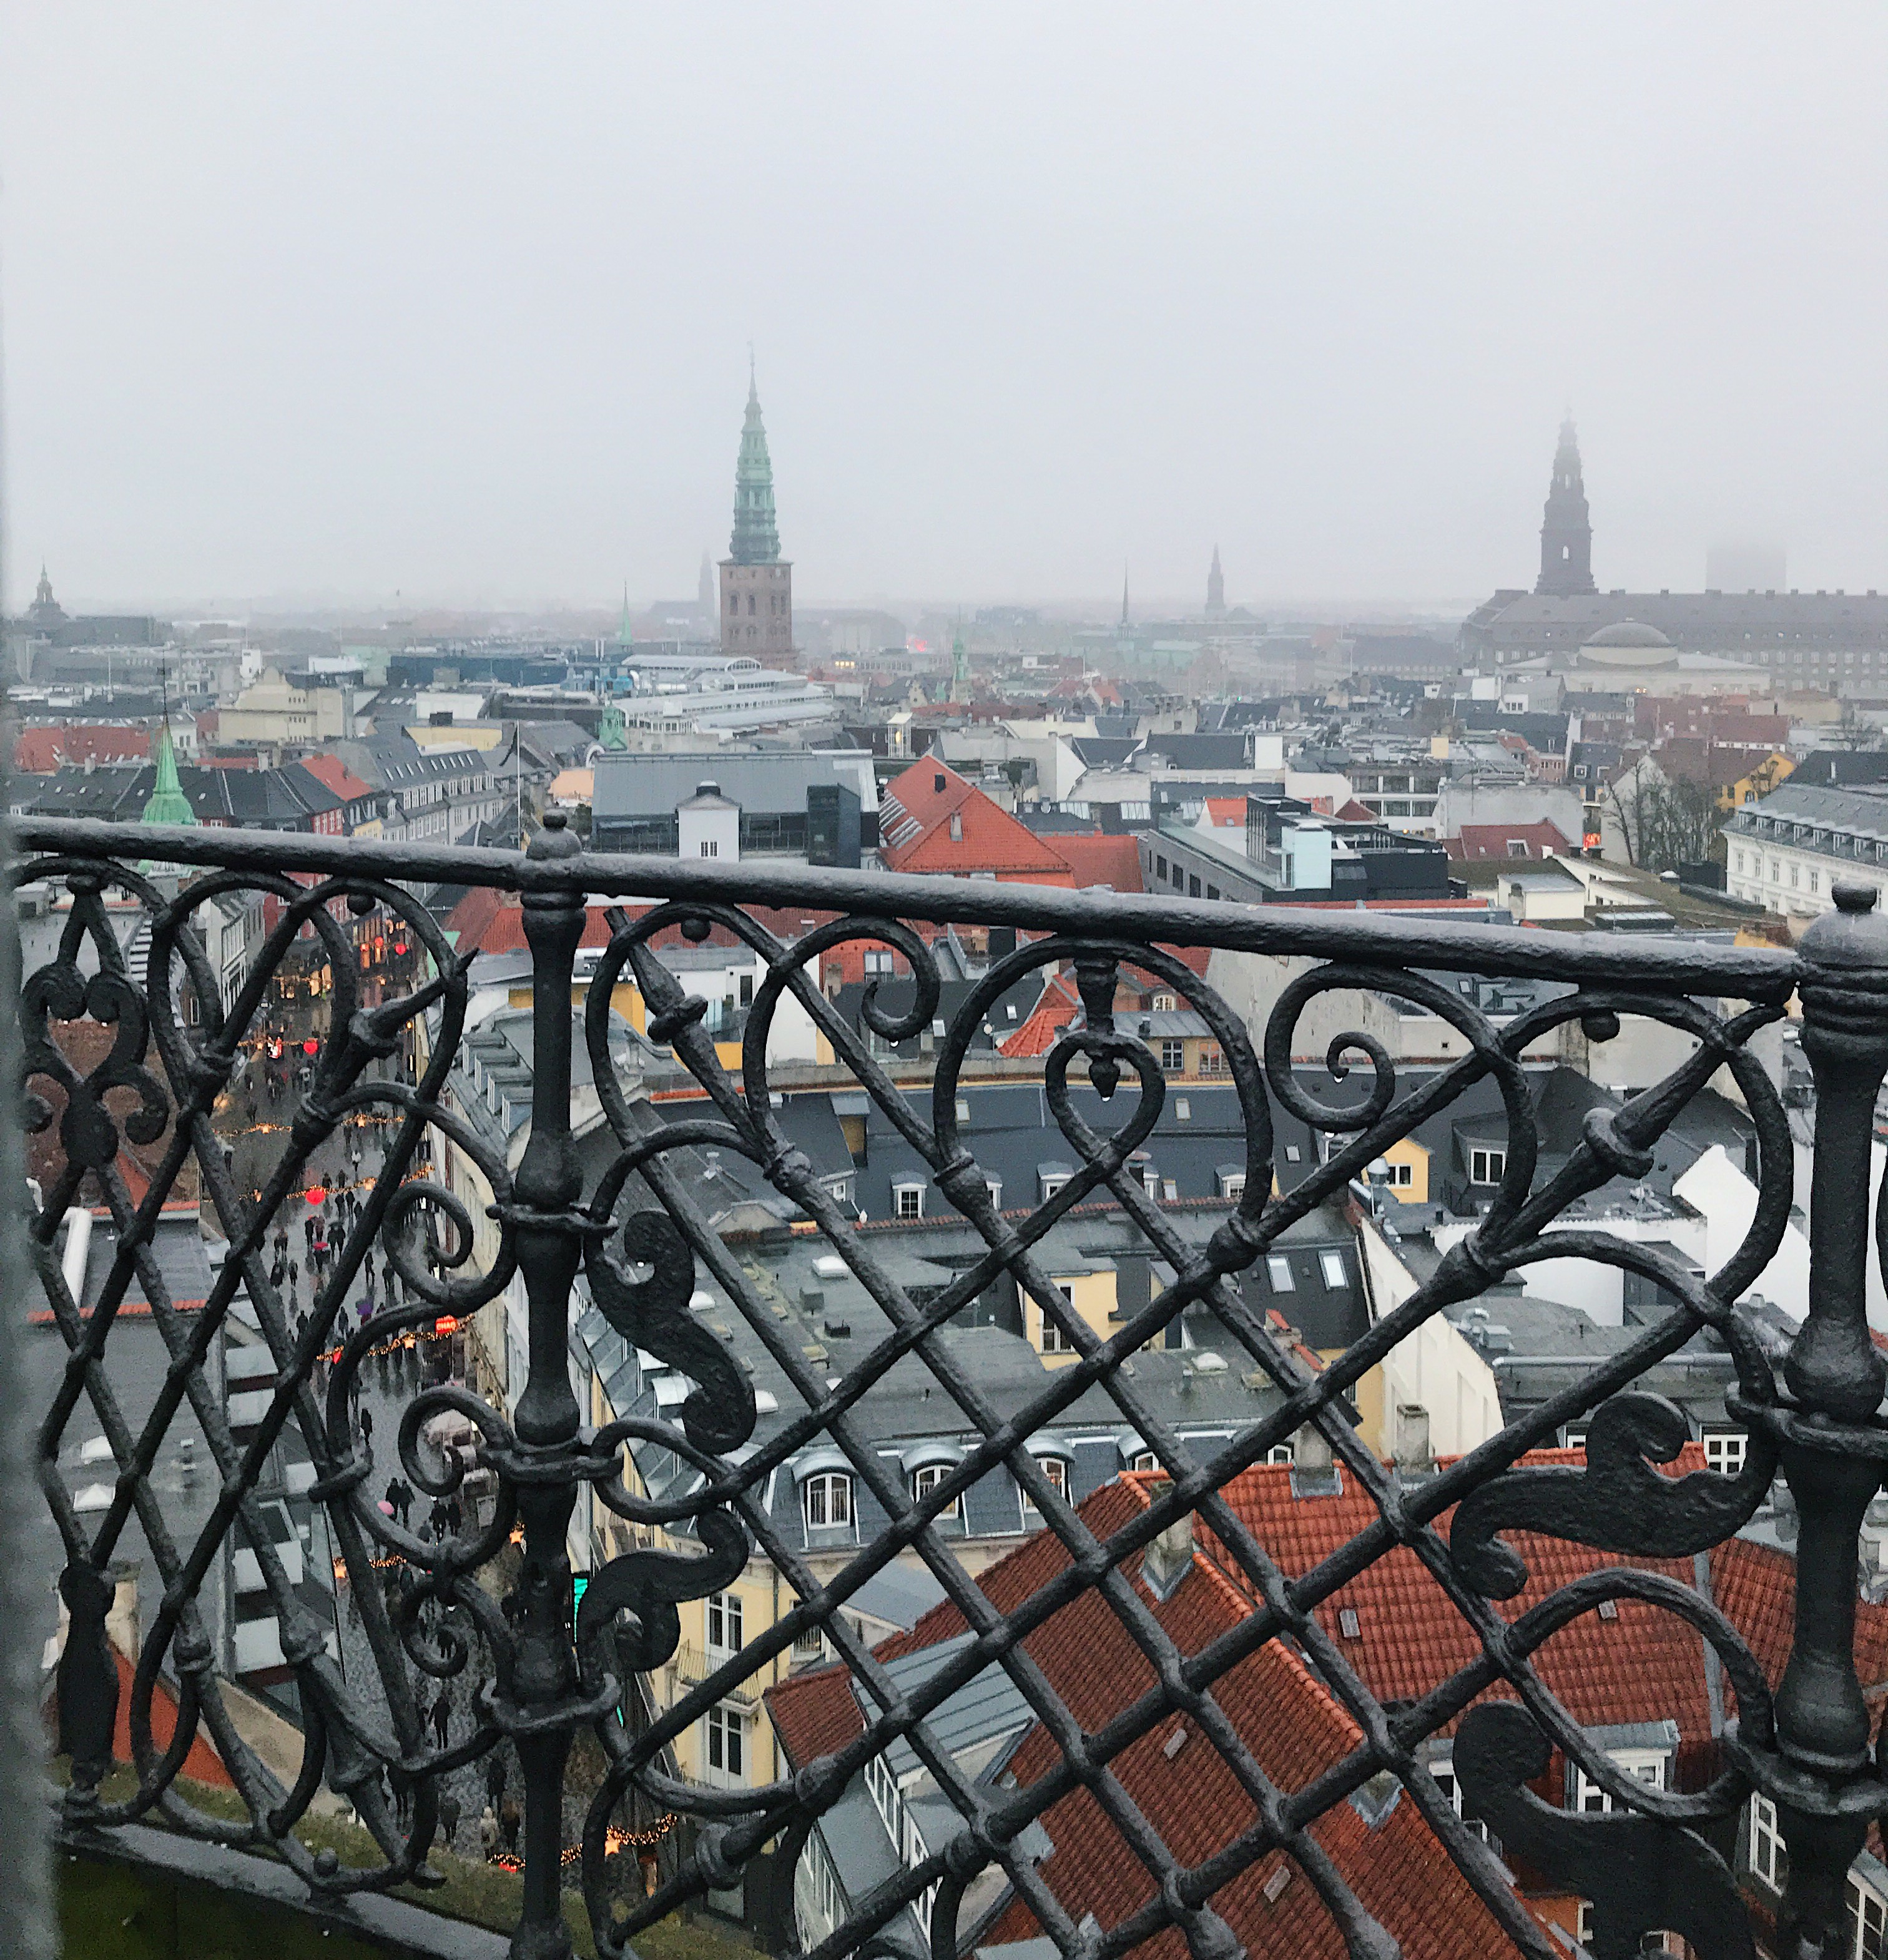 Copenhagen Travel Guide - Tips for visiting Copenhagen in Winter // What to see, what to eat, and what to skip - ew & pt